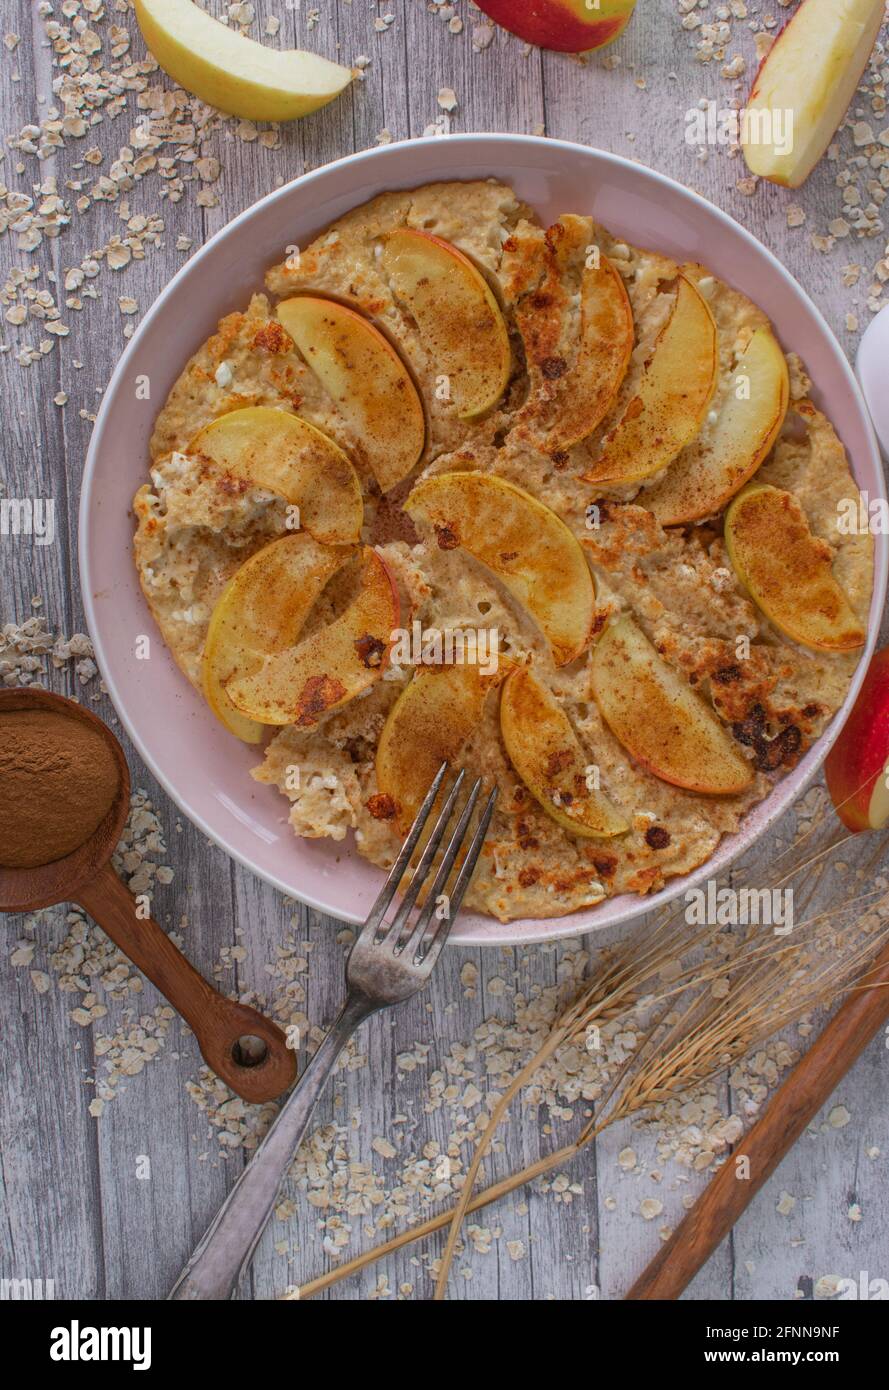 Protein pancake made with gluten free oatmeal, cottage cheese, apples and cinnamon served on a plate with fork on rustic table background Stock Photo